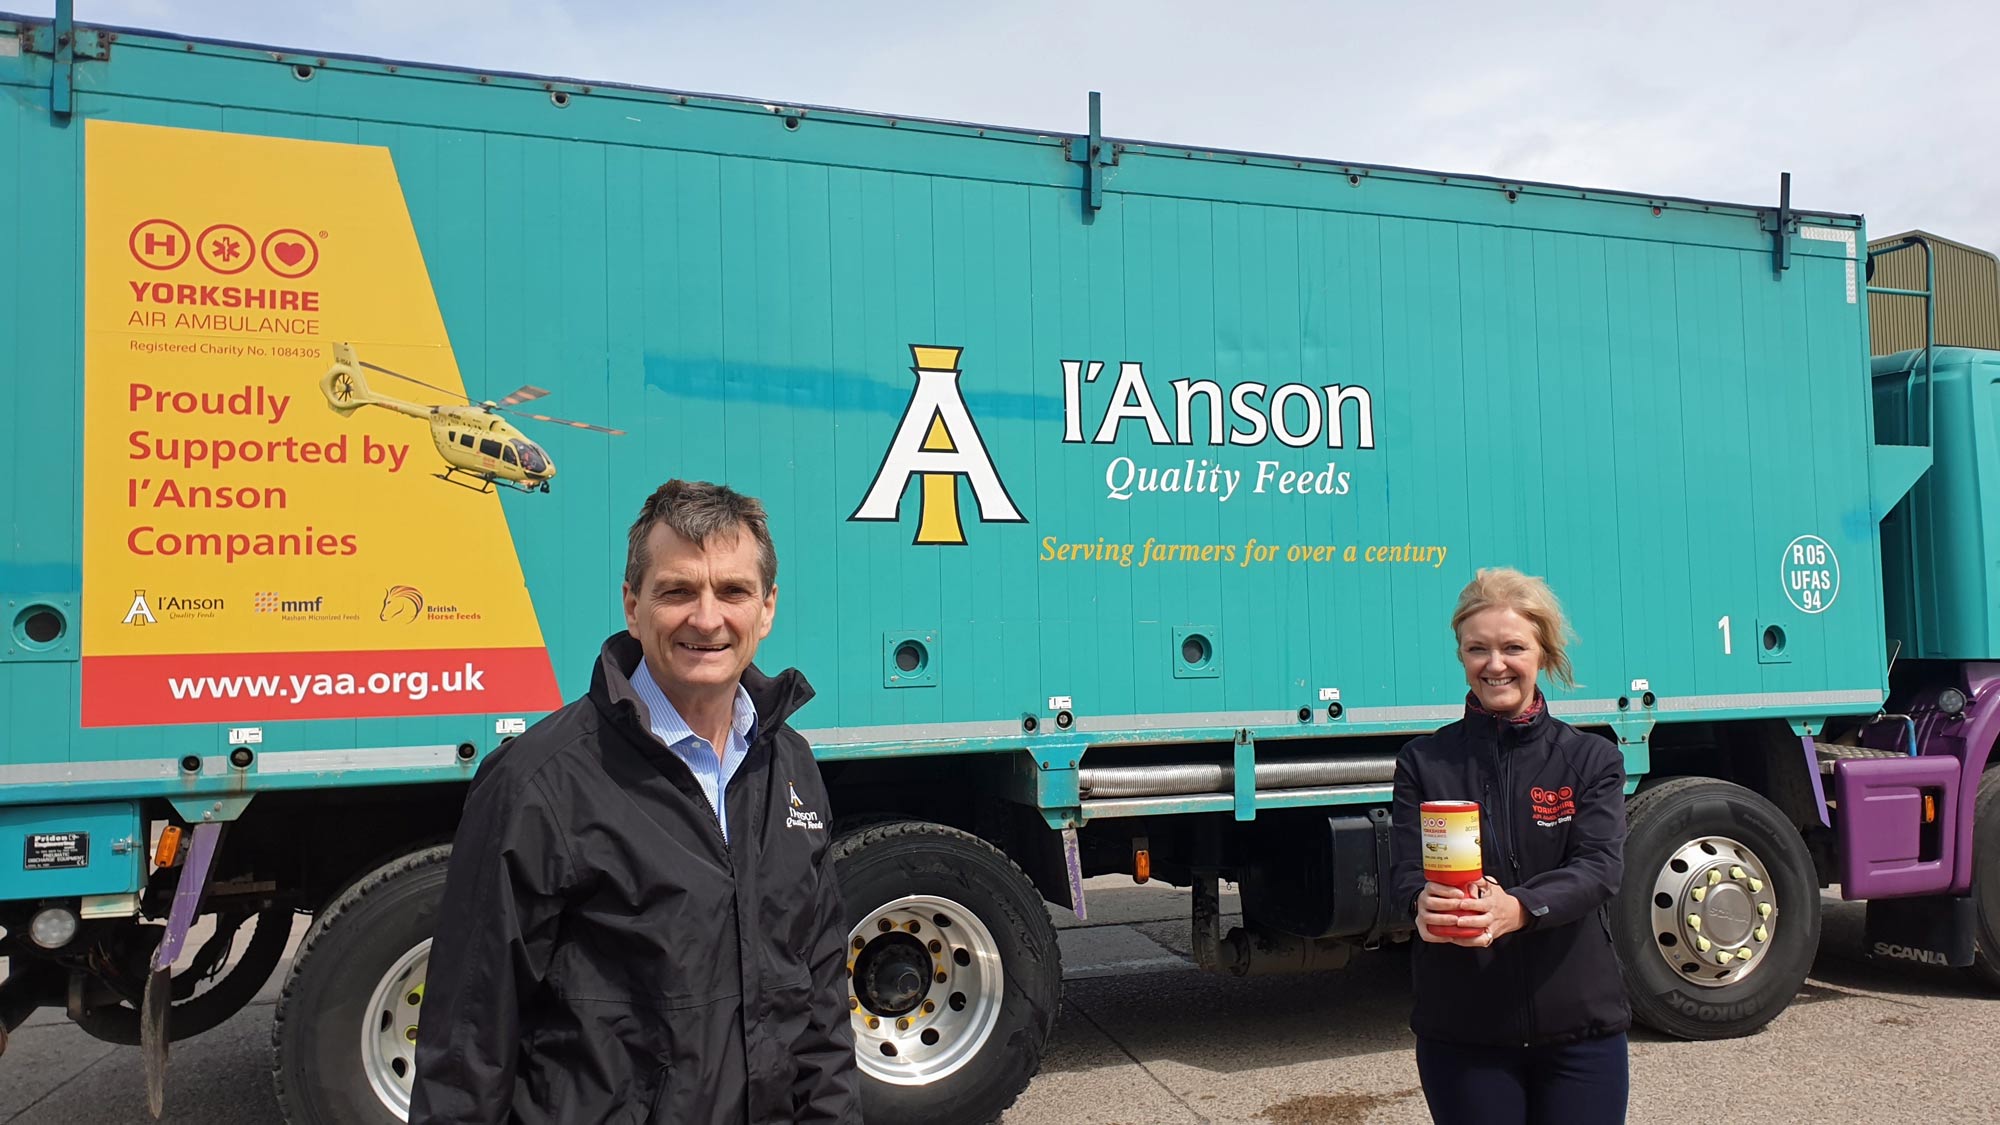 Chris I’Anson Managing Director of I’Anson Bros Ltd and Helen Callear, Director of Fundraising (North and East) for the Yorkshire Air Ambulance